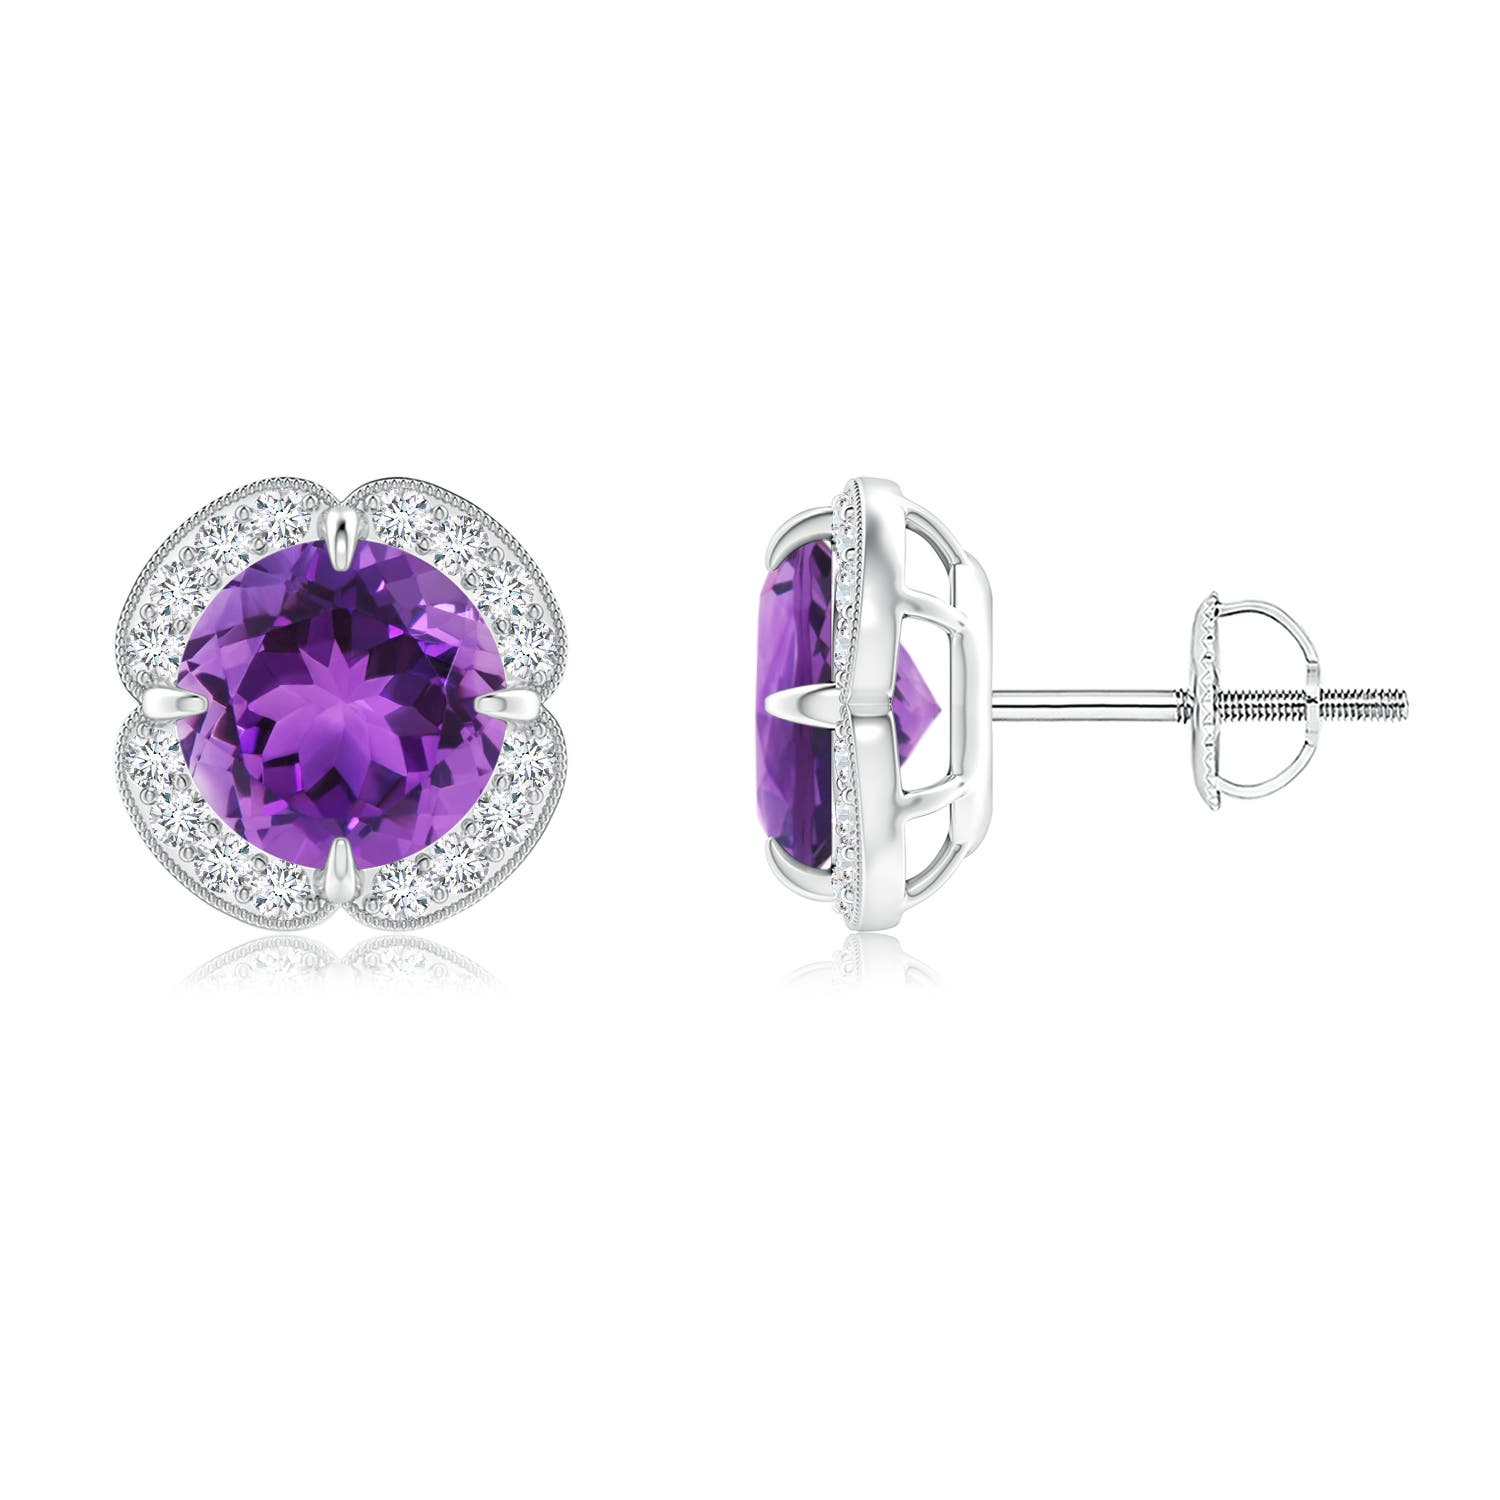 AAA - Amethyst / 2.56 CT / 14 KT White Gold